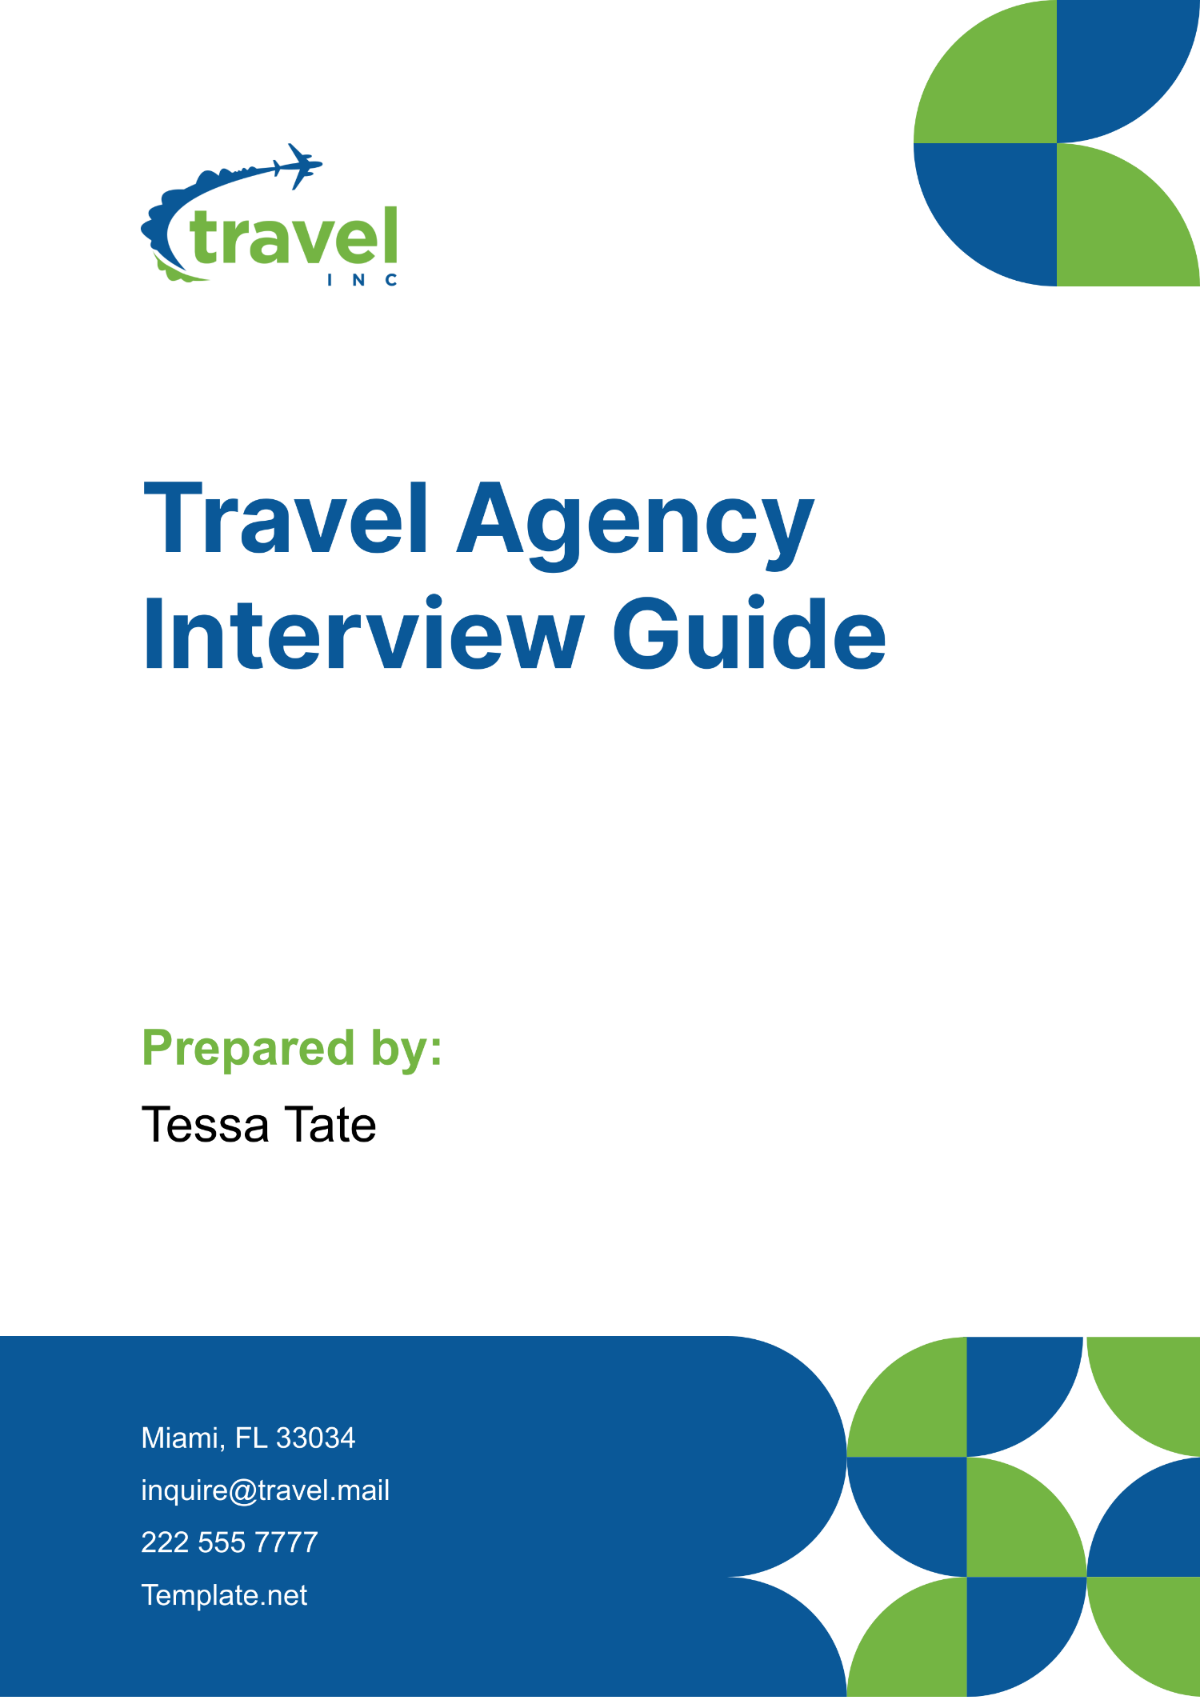 Travel Agency Interview Guide Template